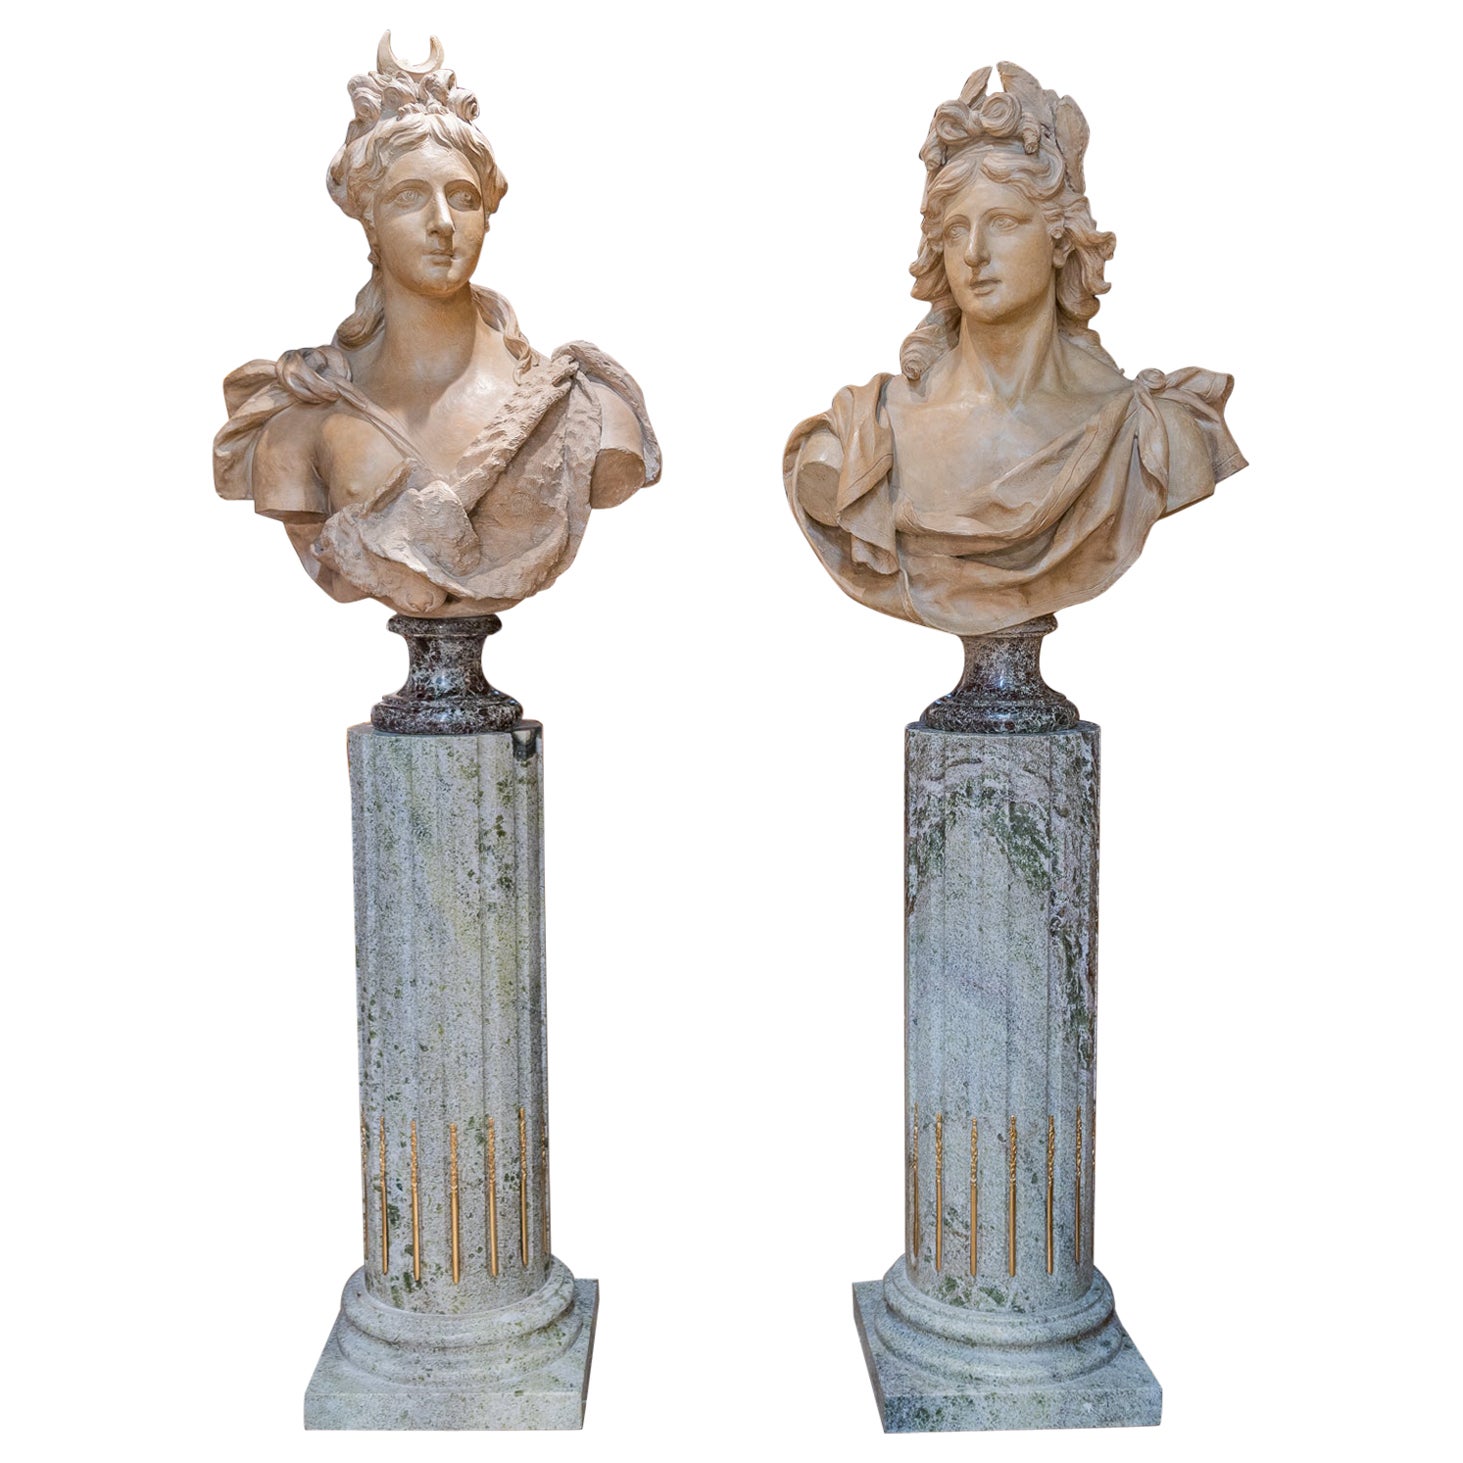 Magnificent Pair of Late 18th C Large Terra Cotta Busts of Apollo and Diana